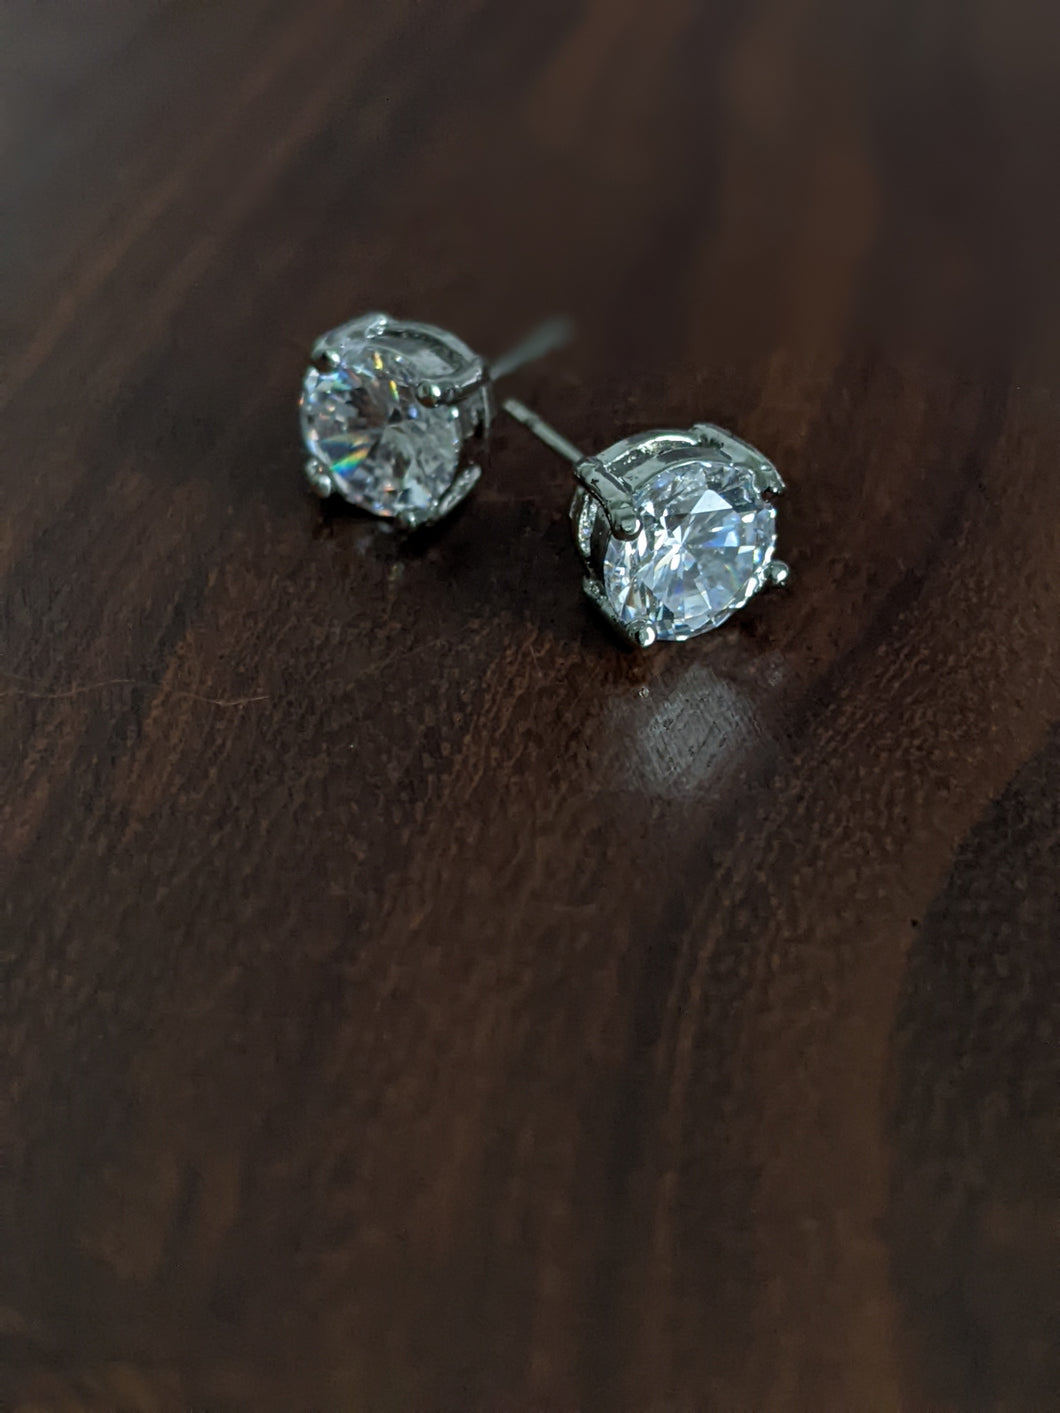 Diamond look earrings in silver, can be paired with any dress and work at any occasion. Elegant and classy